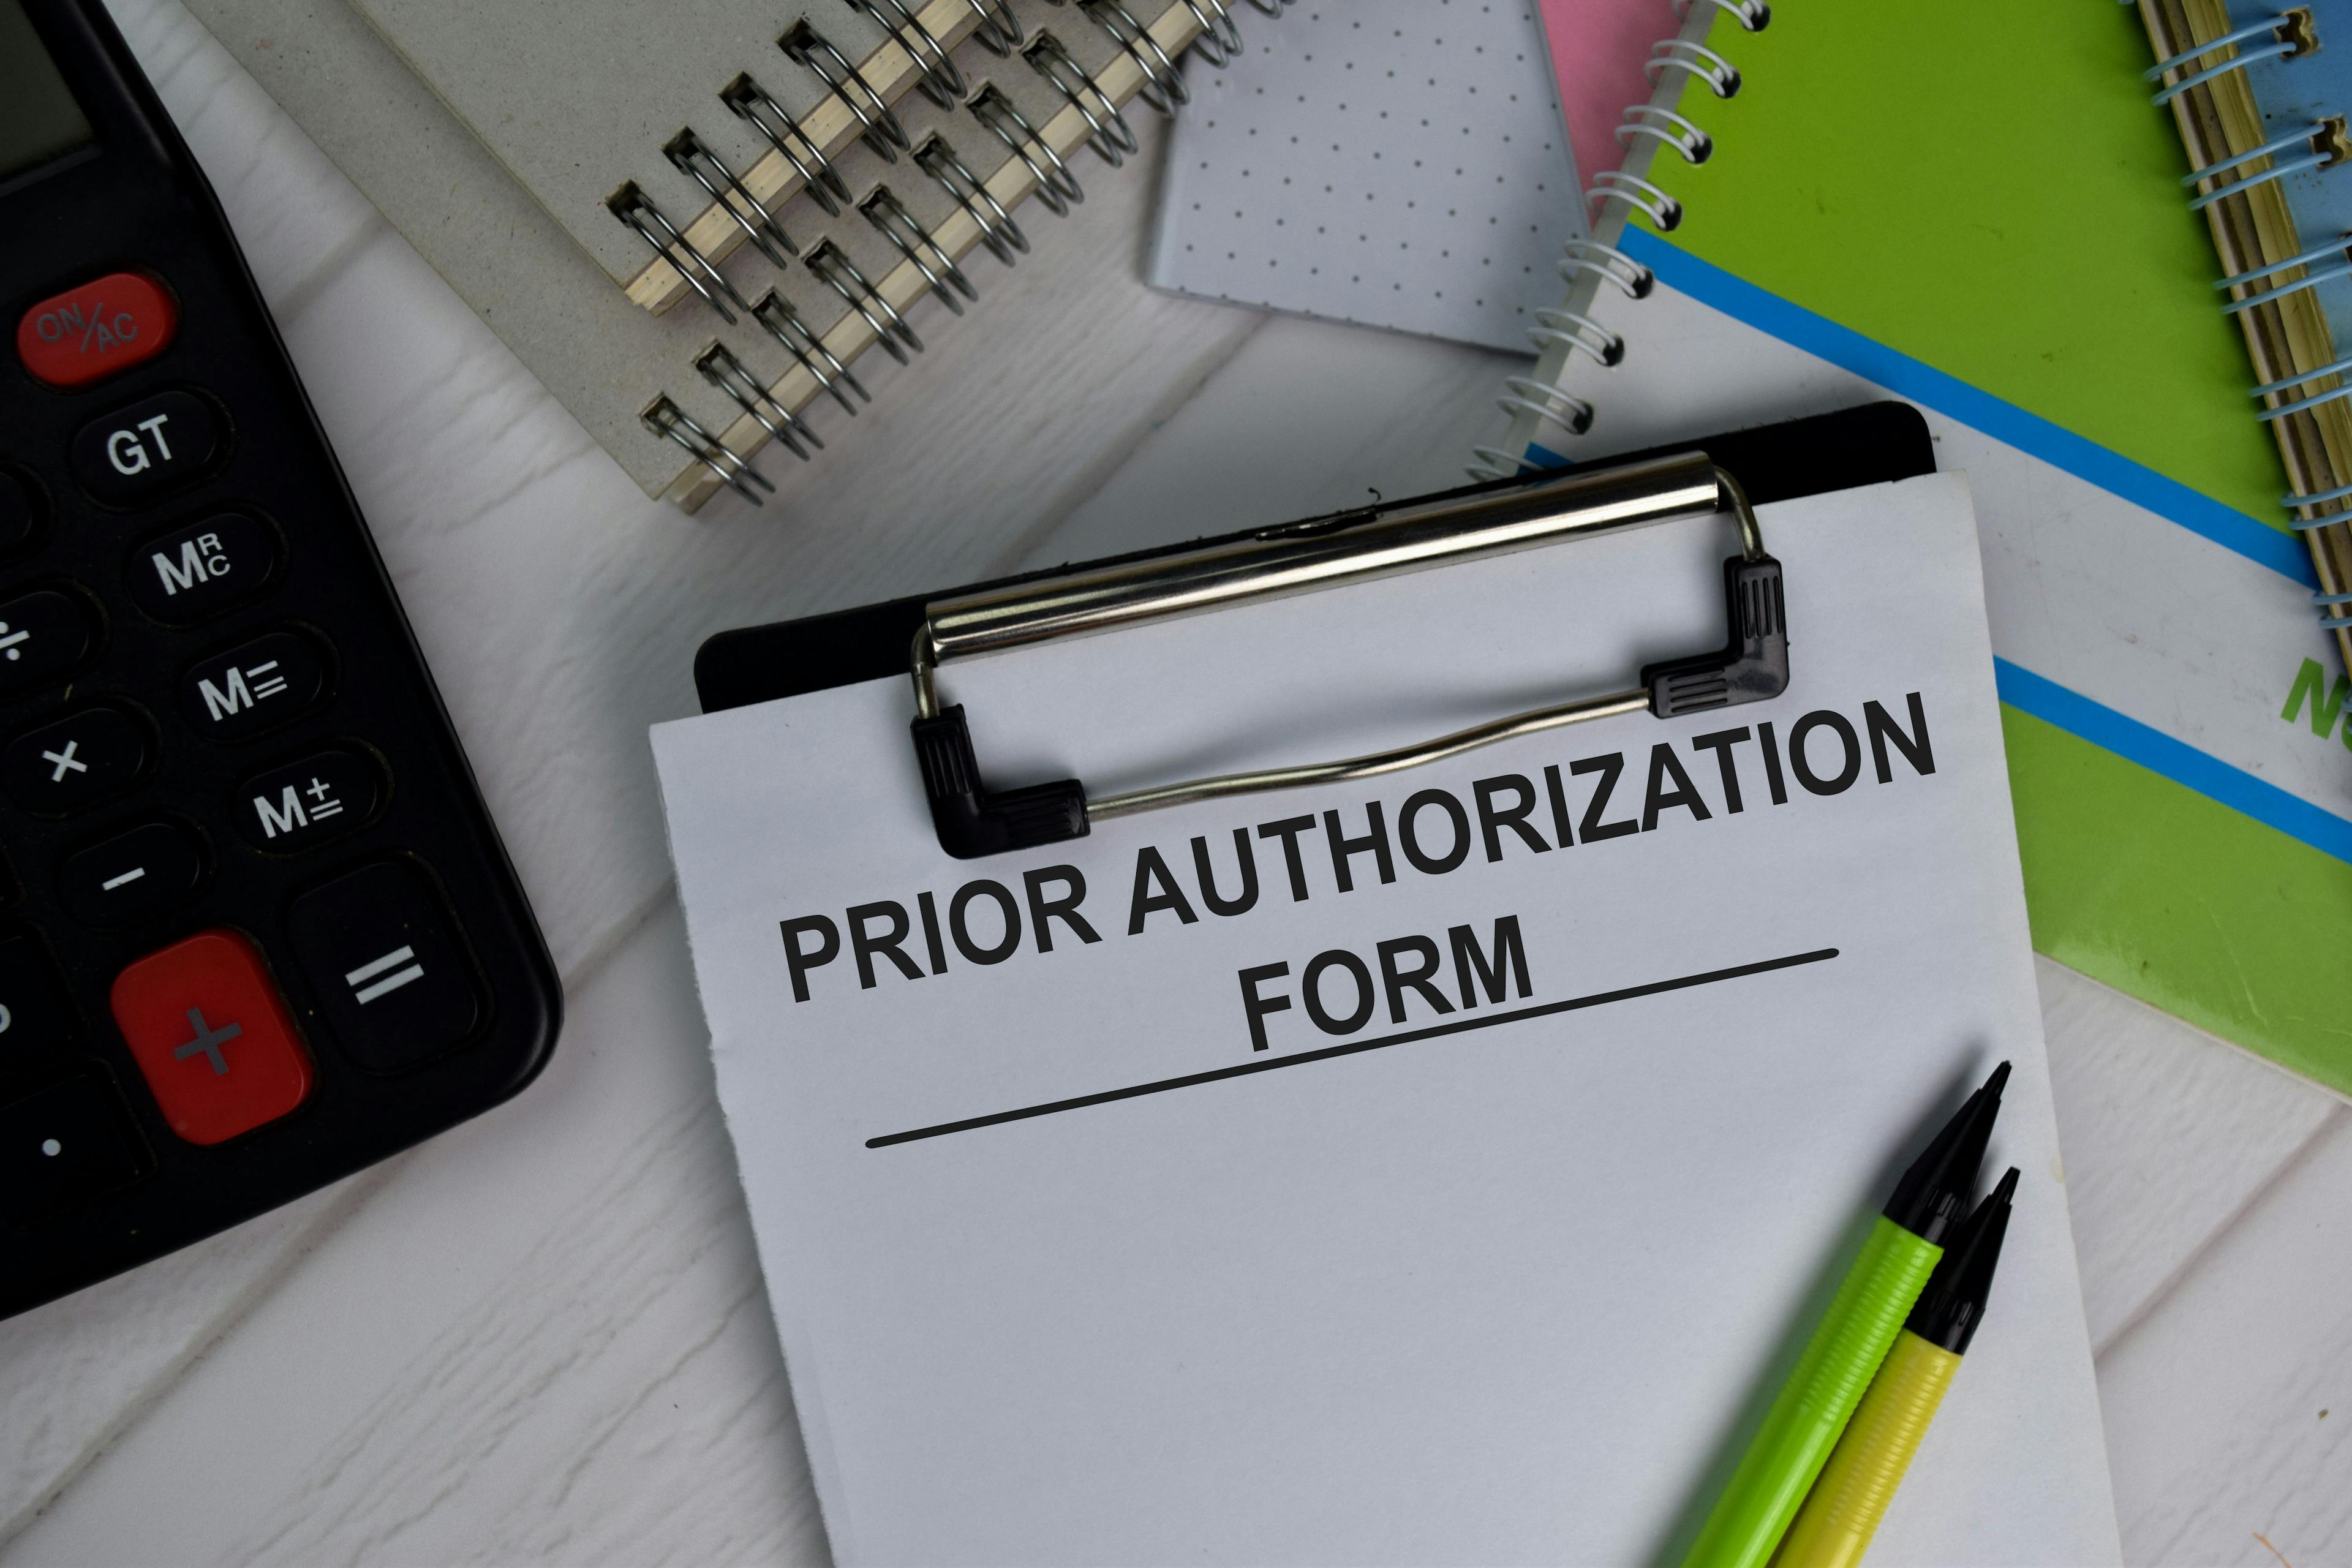 Form on clipboard that says prior authorization form | Image credit: © syahrir stock.adobe.com